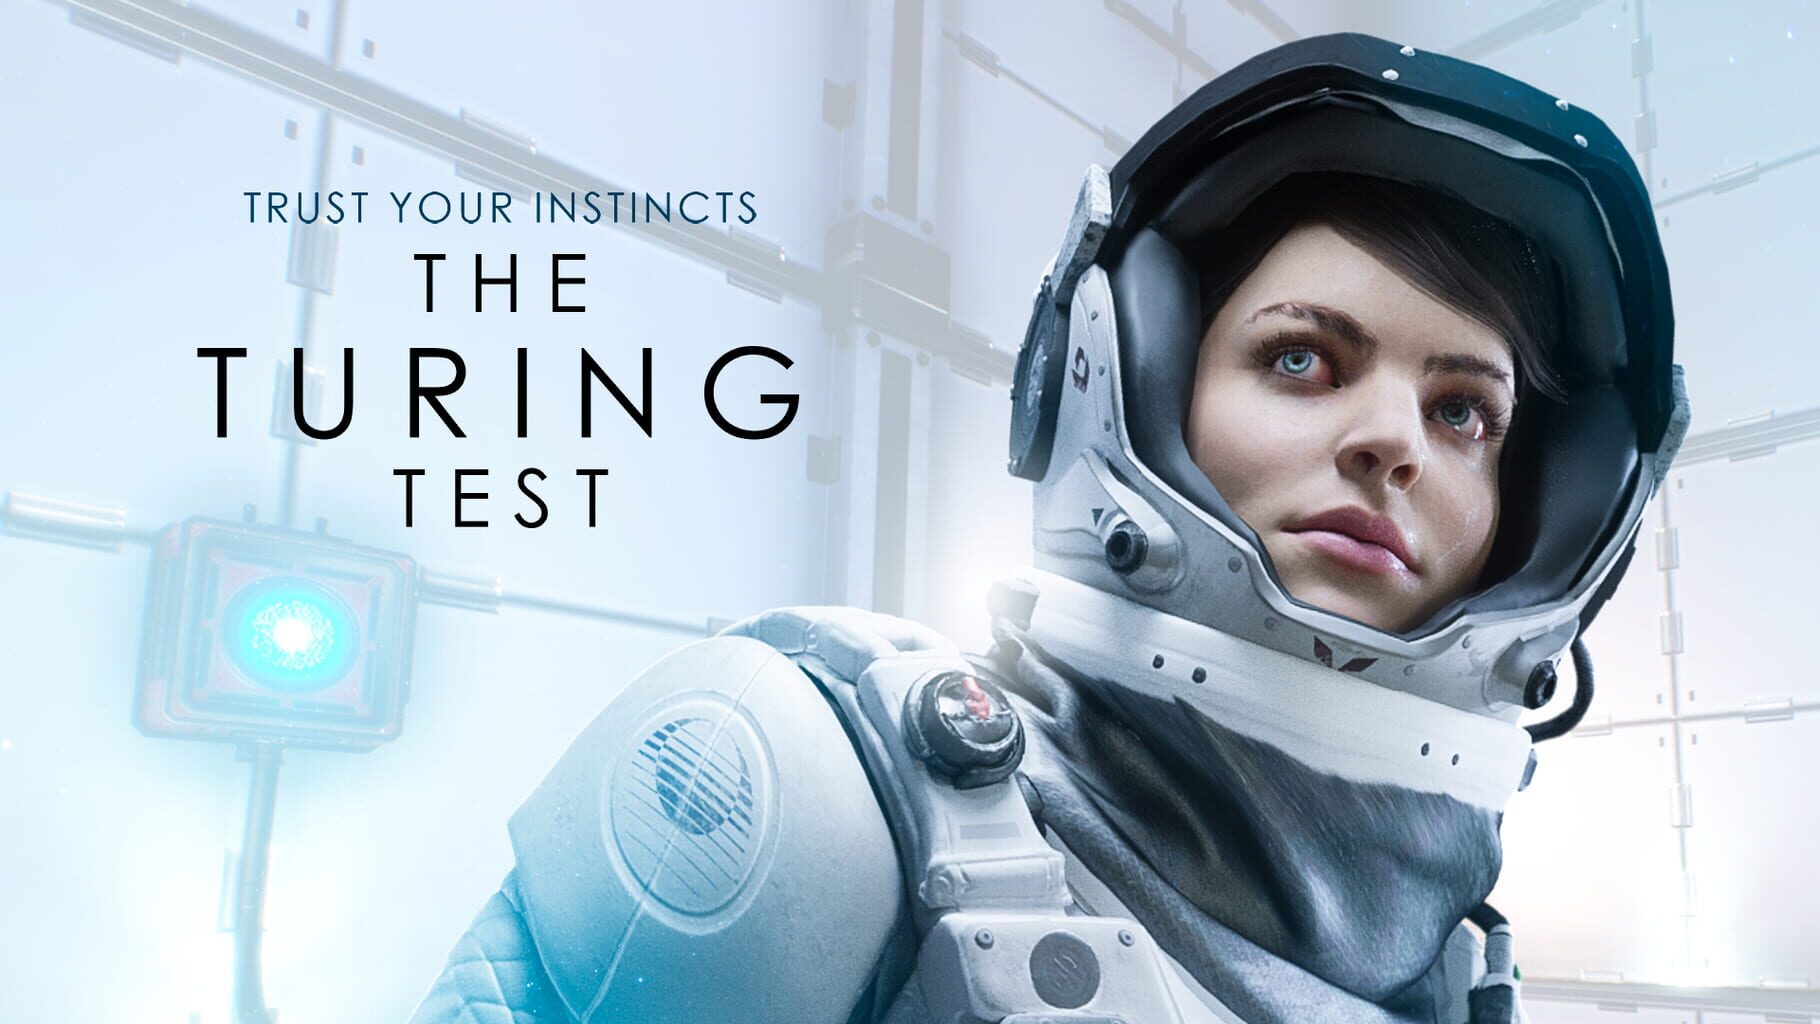 Arte - The Turing Test